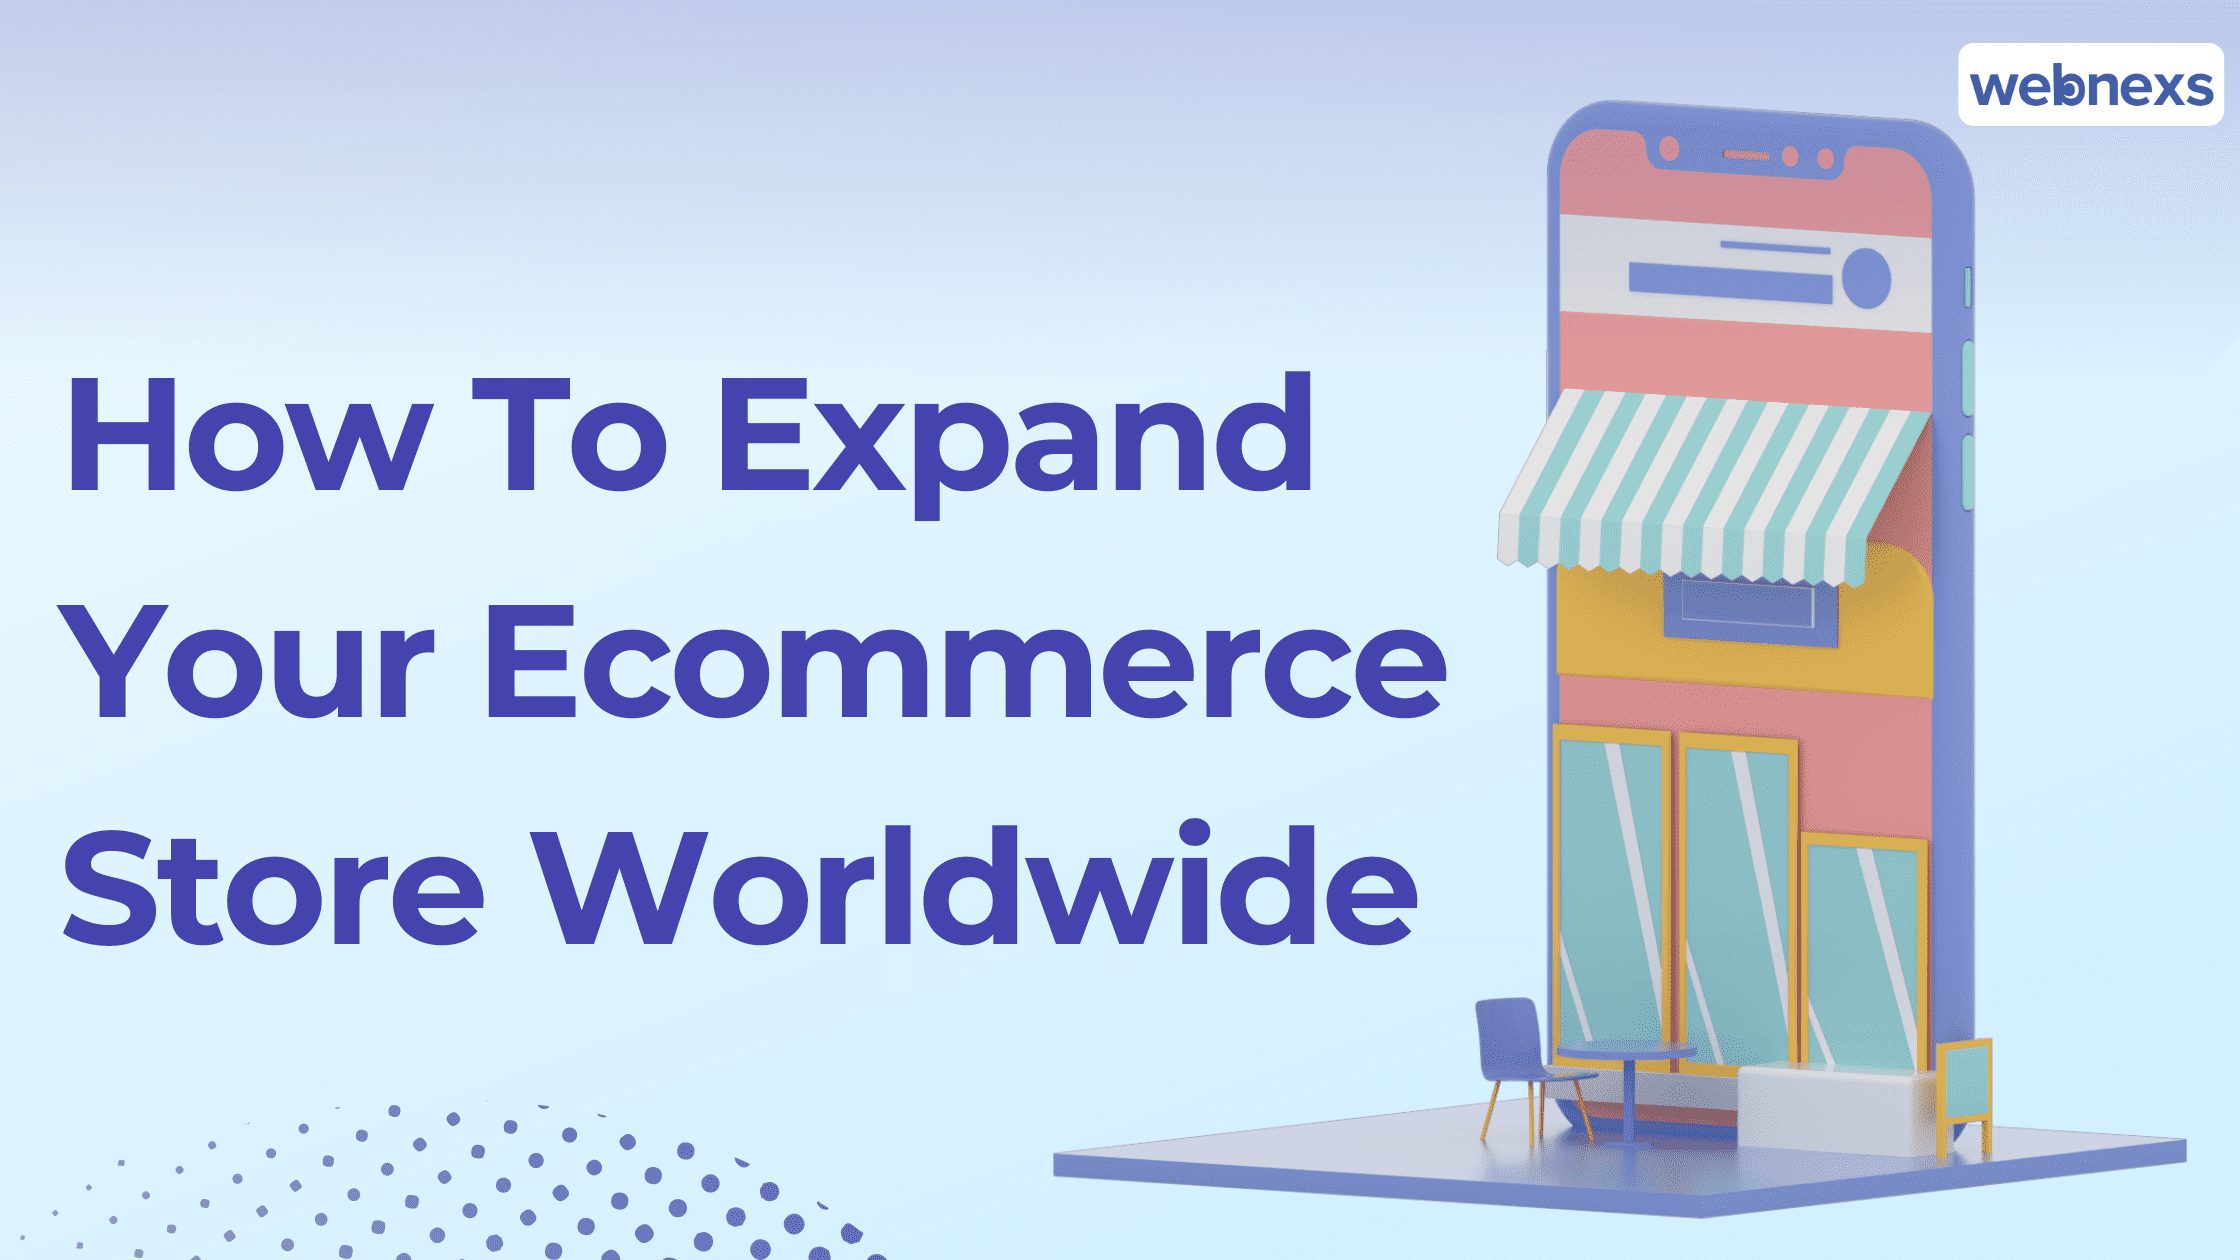 How To Expand Your Ecommerce Store Worldwide